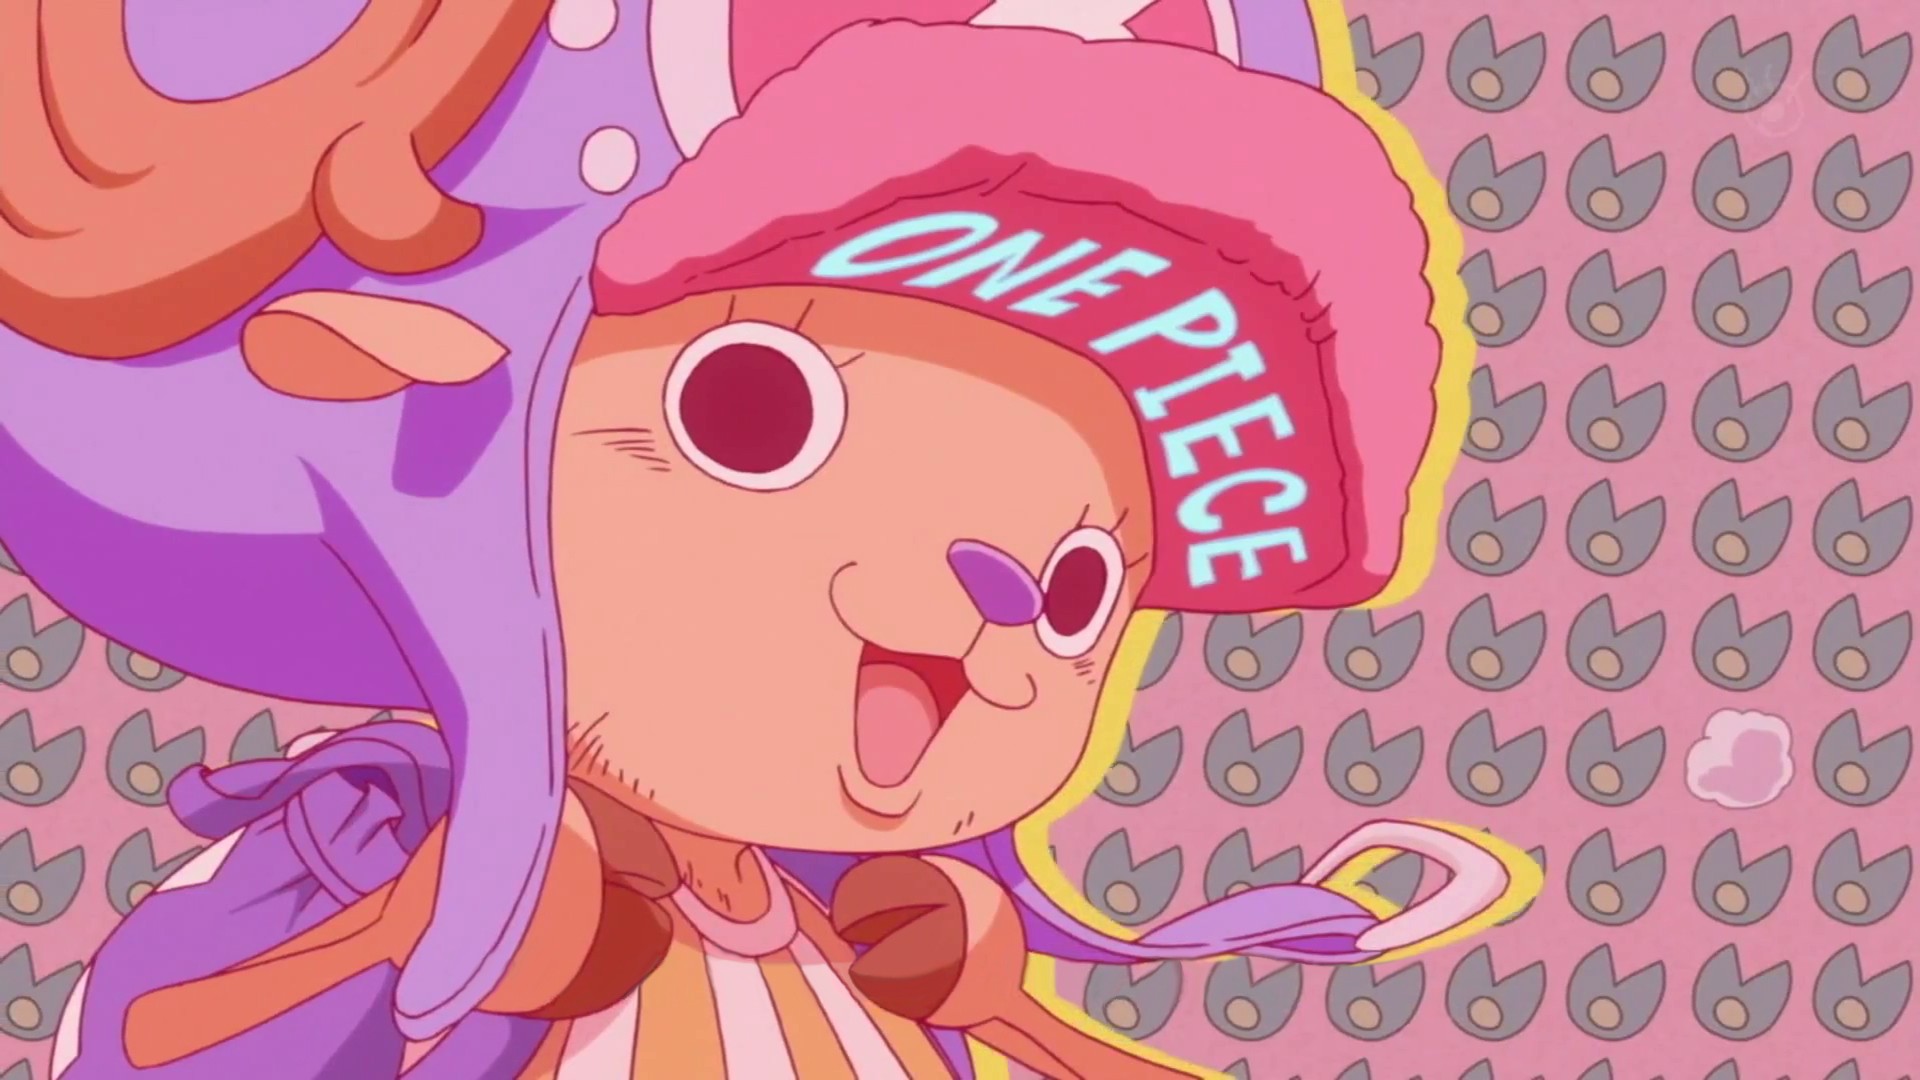 Wallpaper, illustration, anime, red, purple, cartoon, mouth, nose, One Piece, pink, happiness, Tony Tony Chopper, magenta, ART, girl, smile, graphics, 1920x1080 px, computer wallpaper, vertebrate, fictional character, organ, fiction, mythical creature